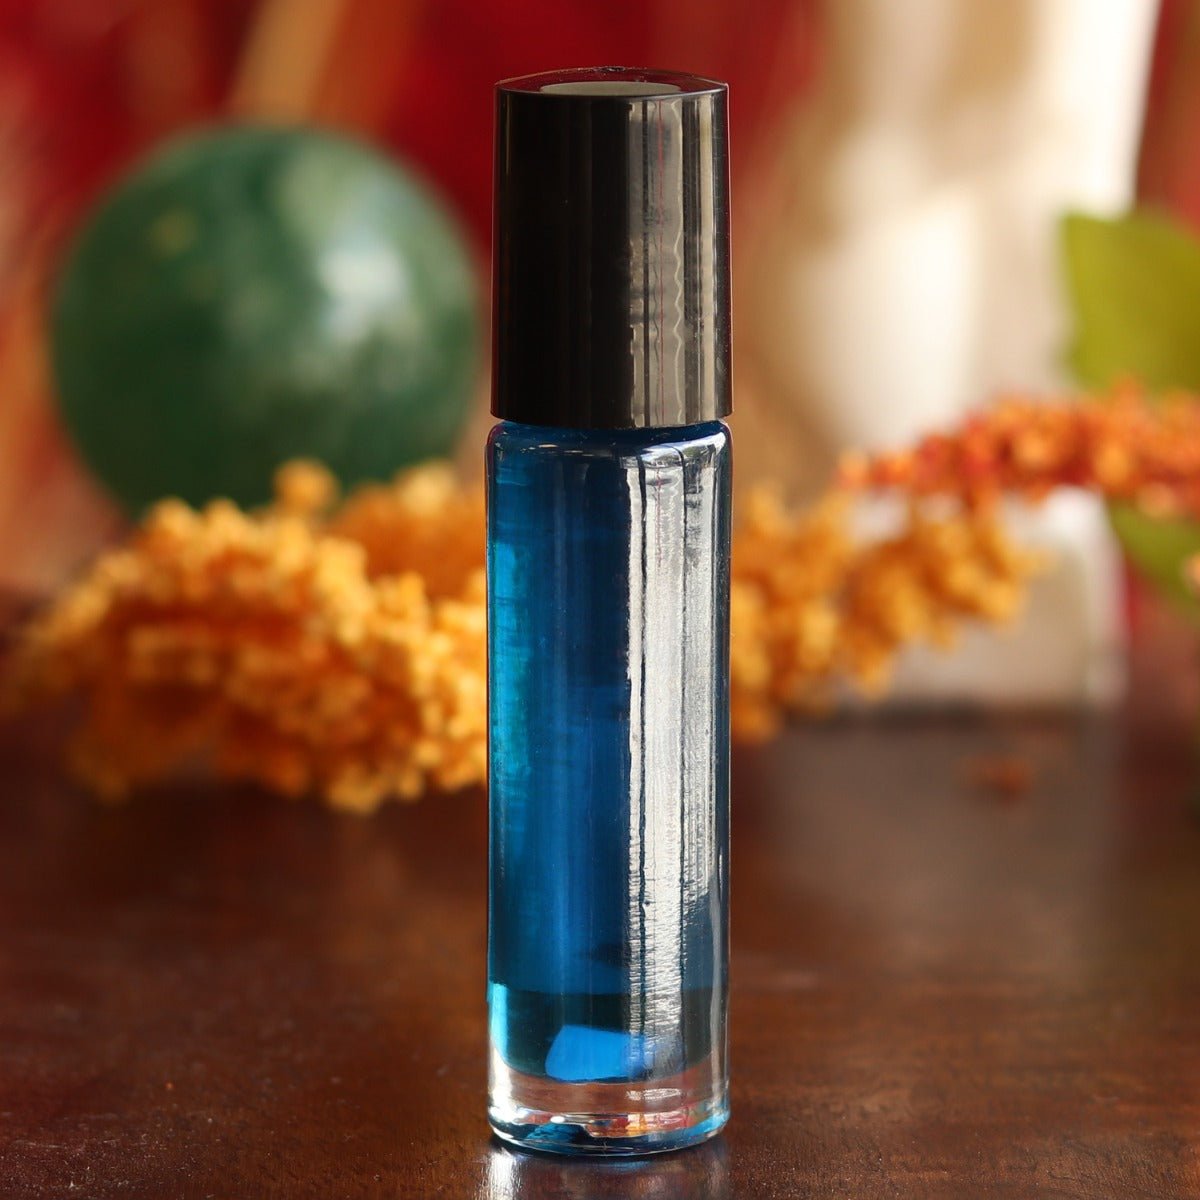 Come To Me for Him Pheromone Oil - 13 Moons